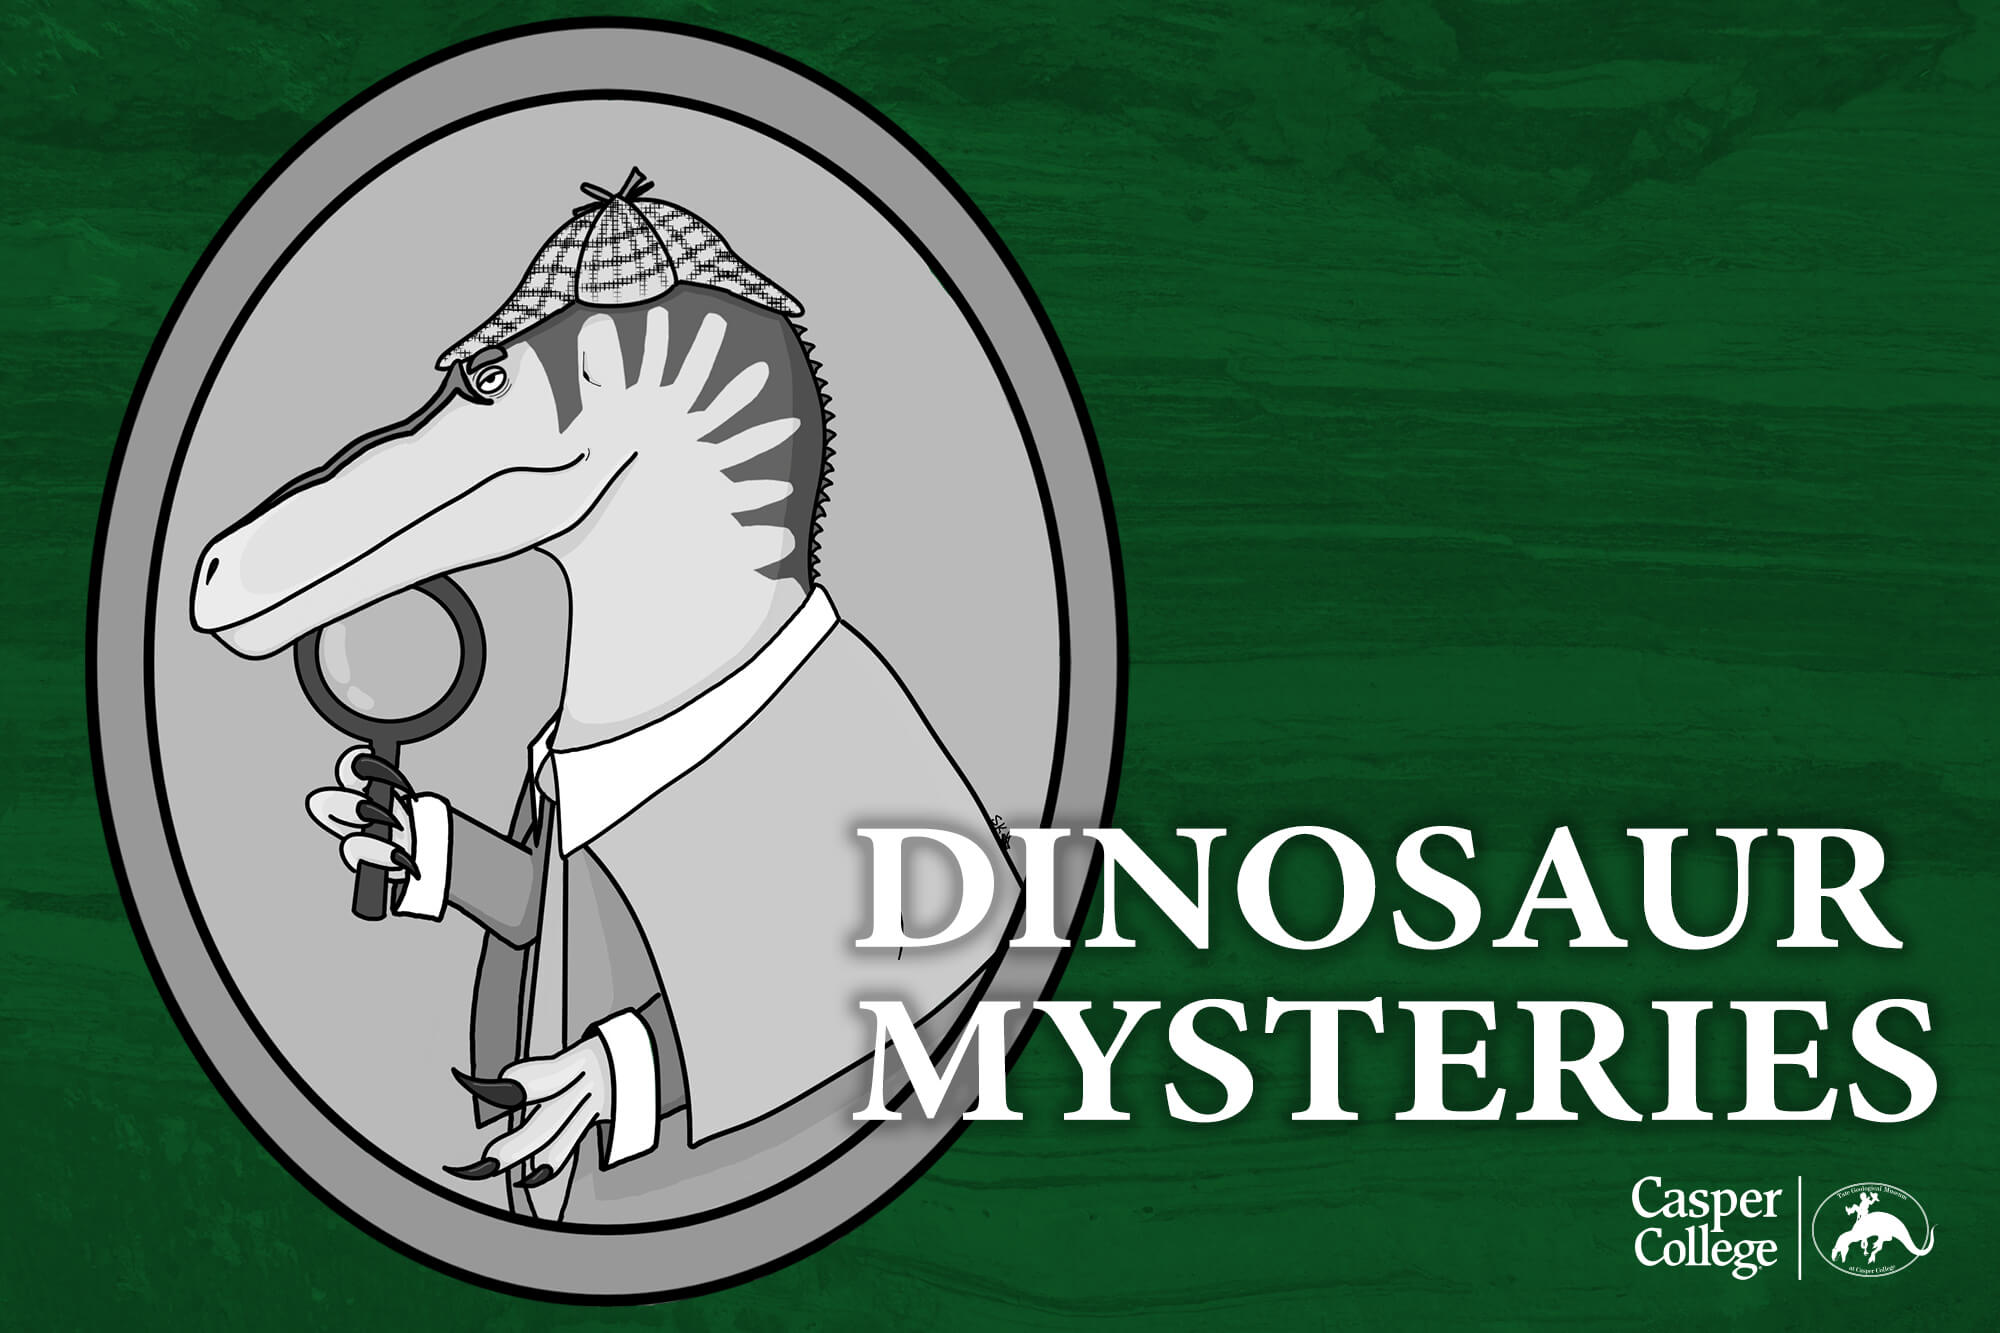 Image for the Dino Mysteries press release.